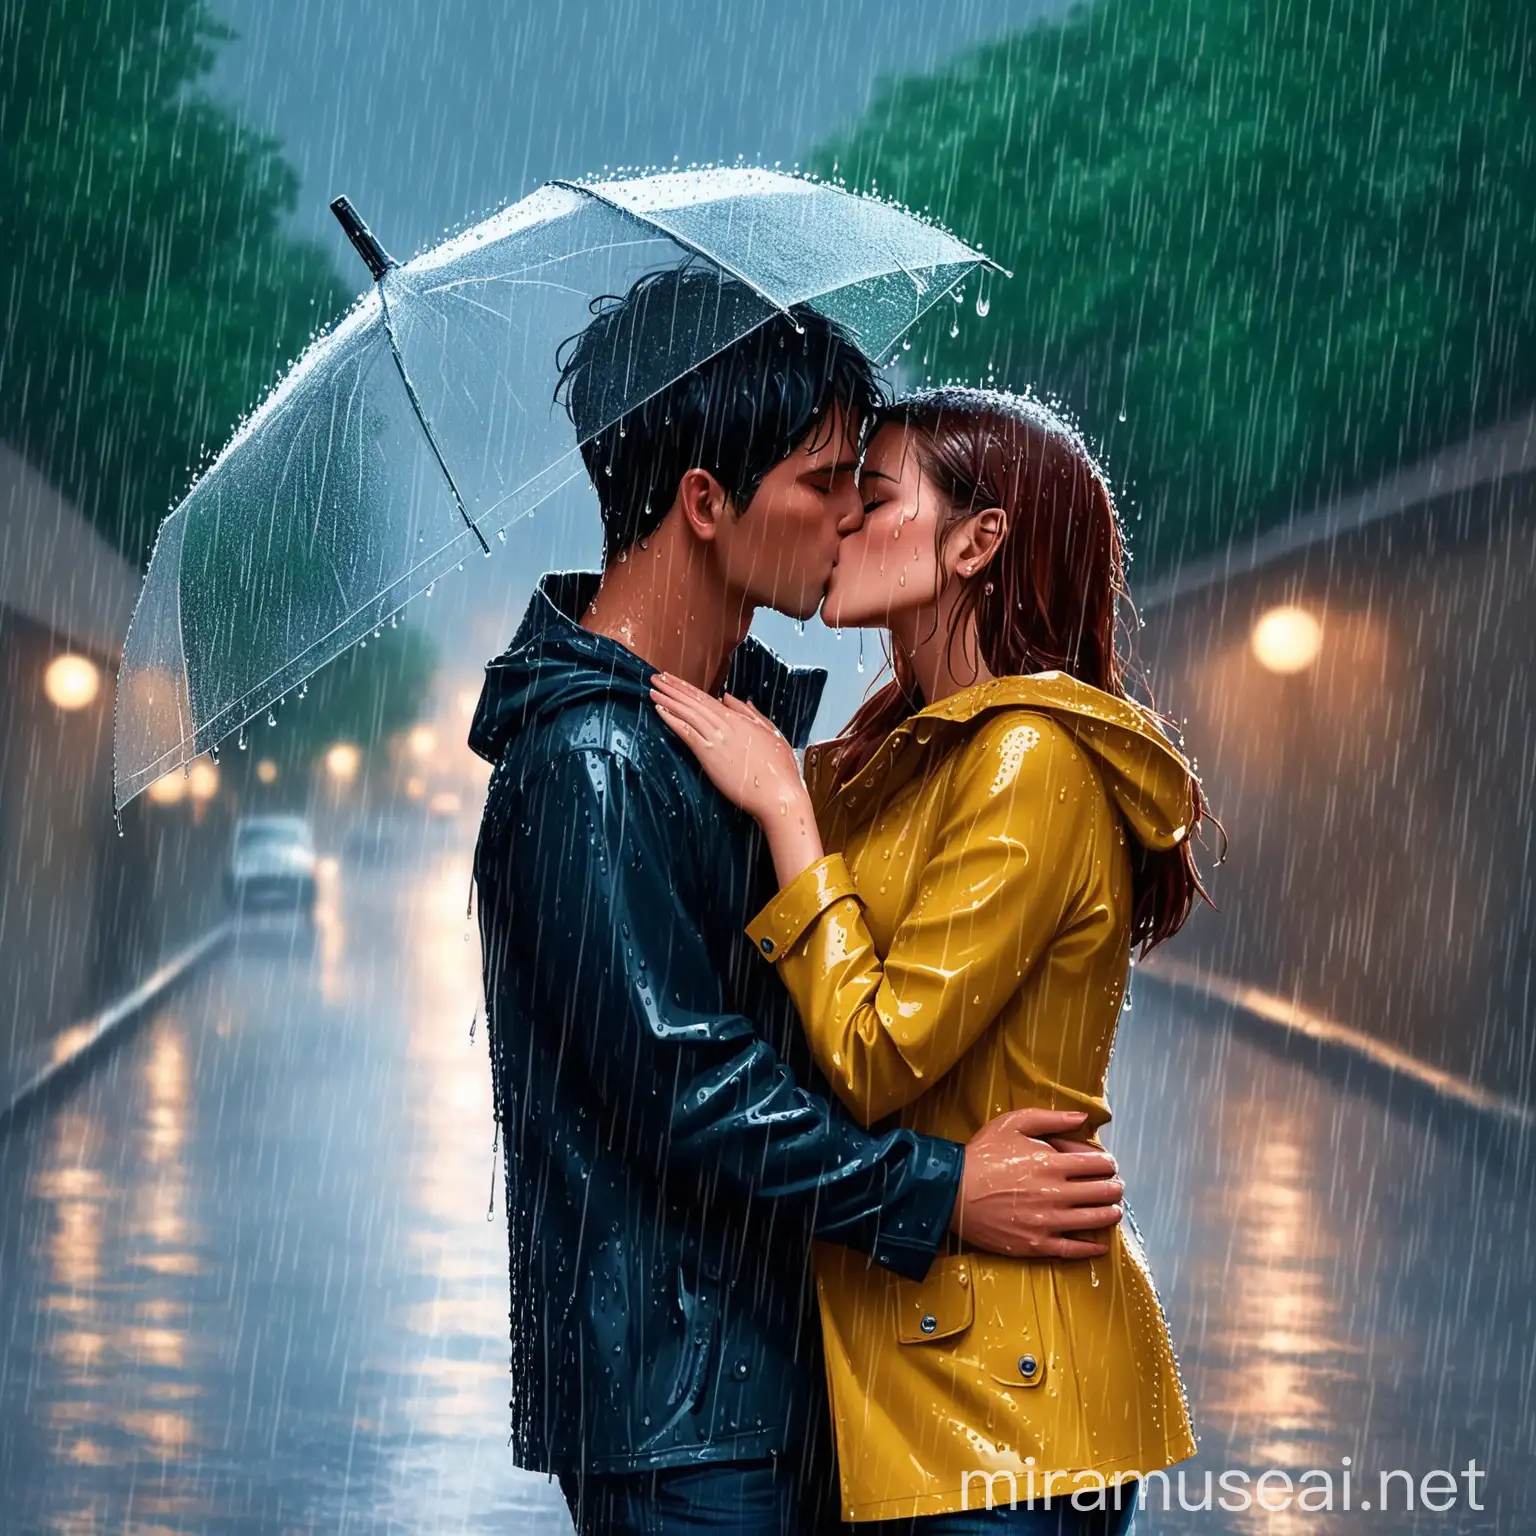 Romantic Couple Kissing in Rain Shower Love and Affection Scene